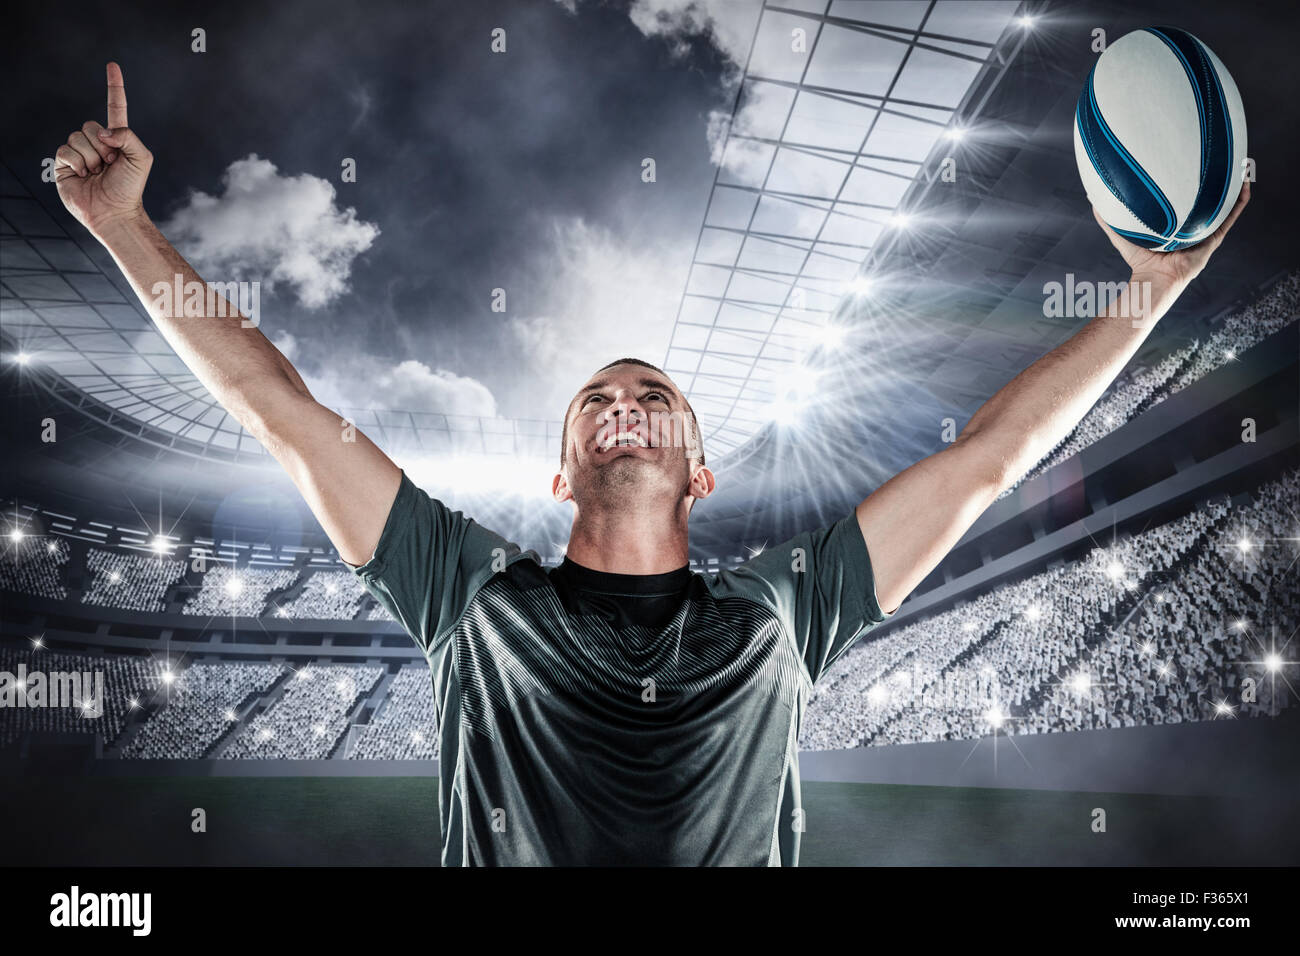 Image composite de rugby player holding ball with arms raised Banque D'Images